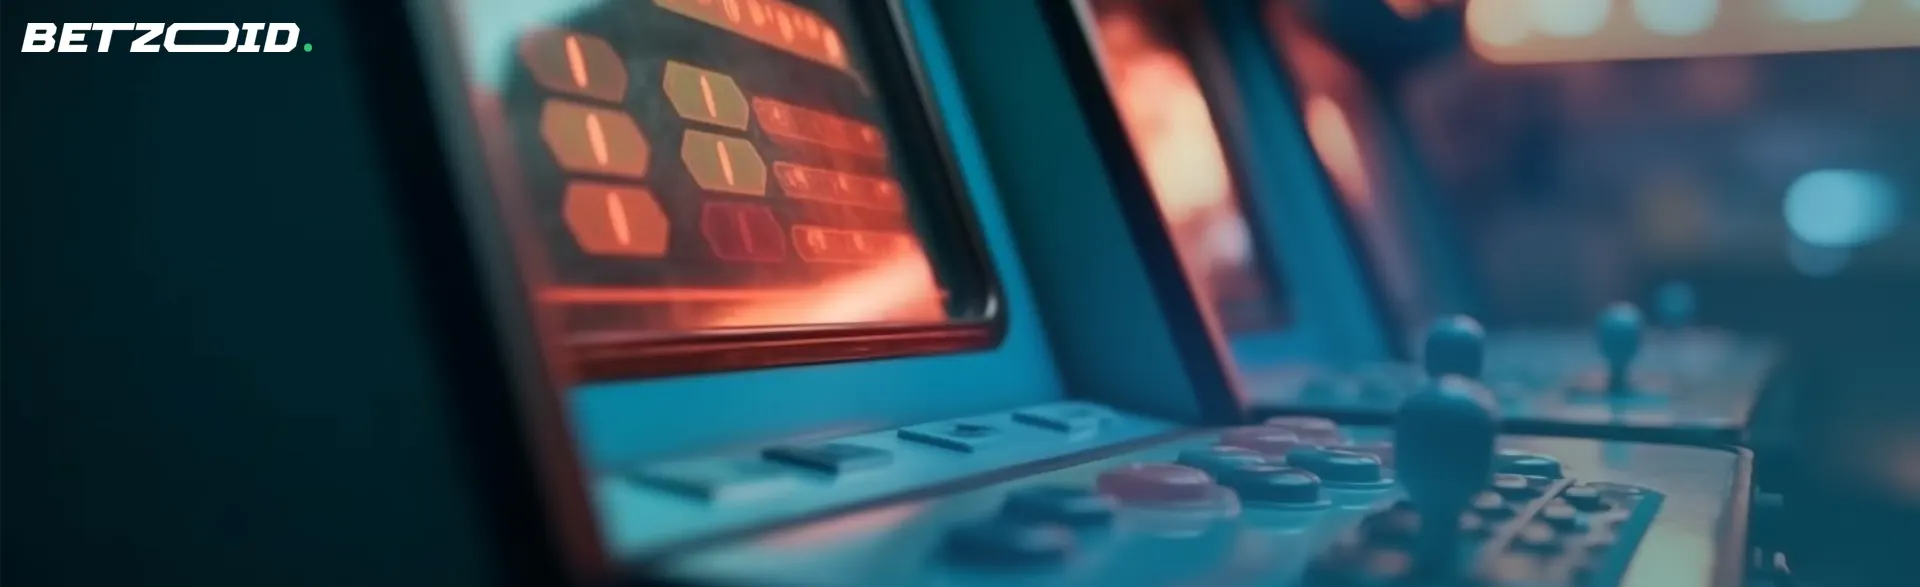 Close-up of a gaming machine interface, symbolizing new mobile pay casinos.